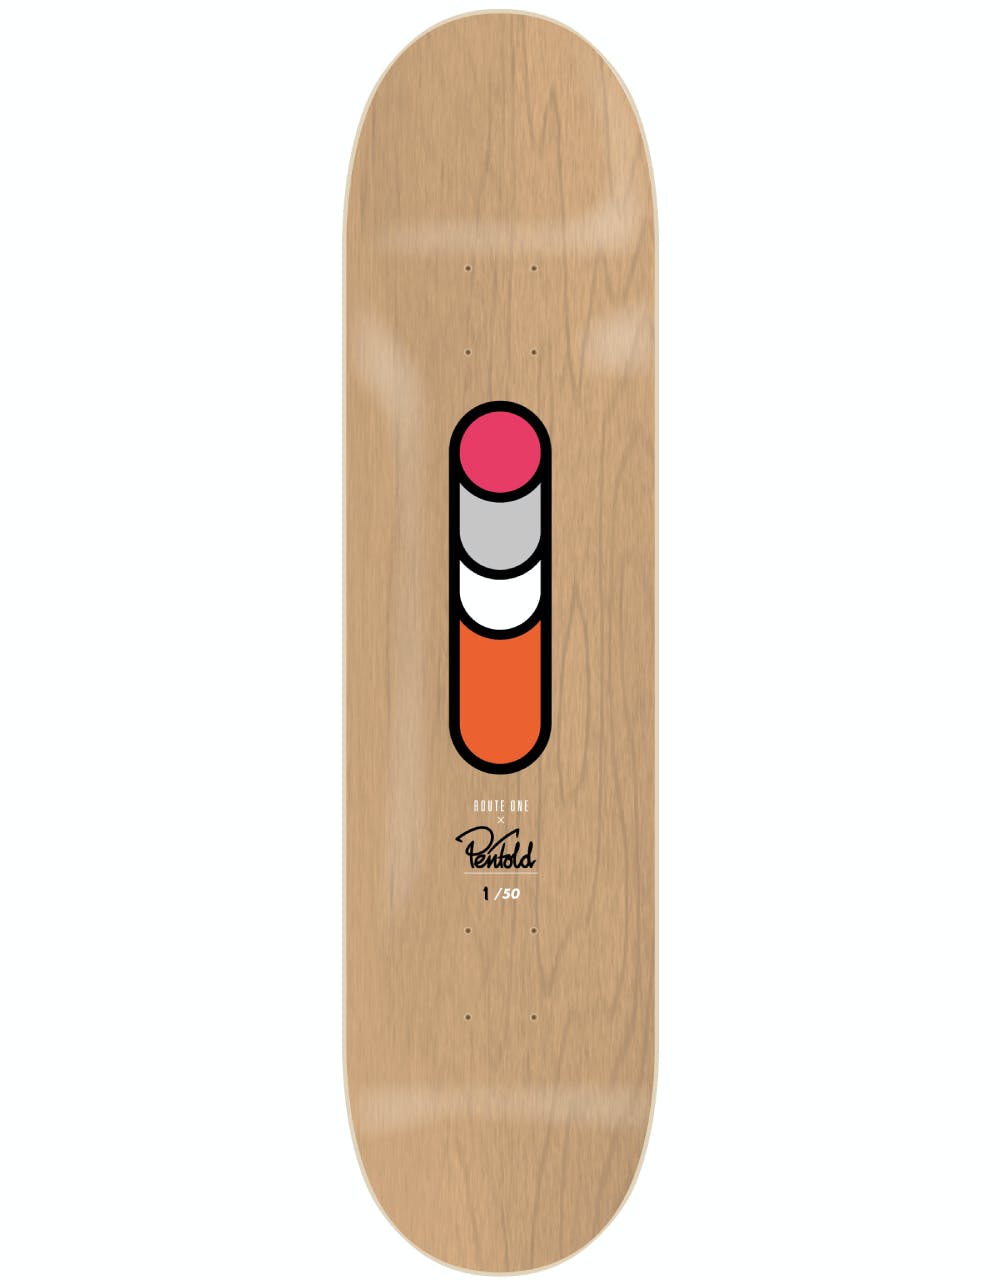 Route One x Mr. Penfold Dog Ends Skateboard Deck - 8"